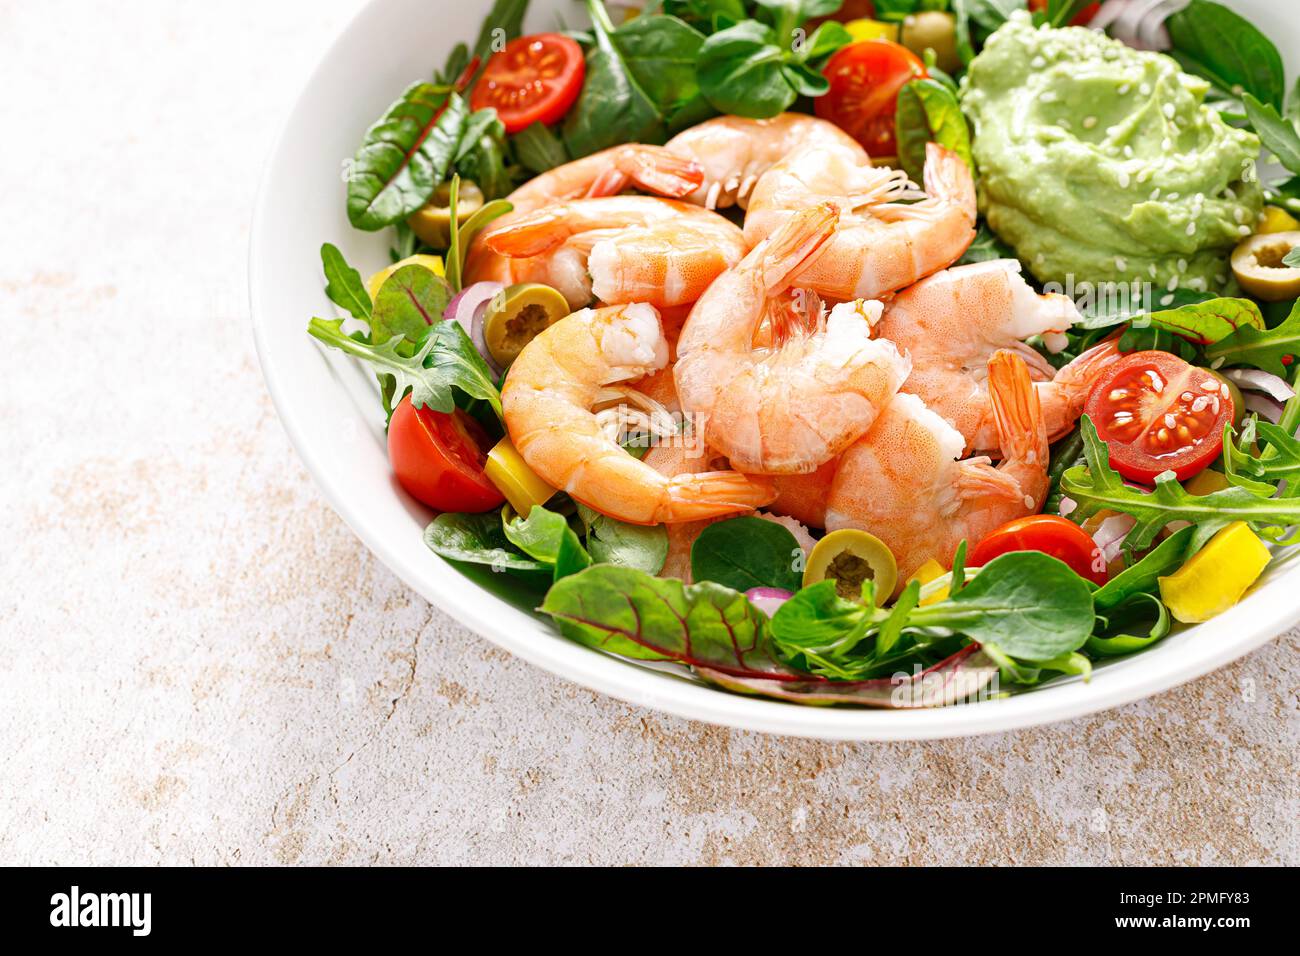 Shrimp and leafy vegetables salad with tomato, bell pepper, olive and avocado sauce Stock Photo